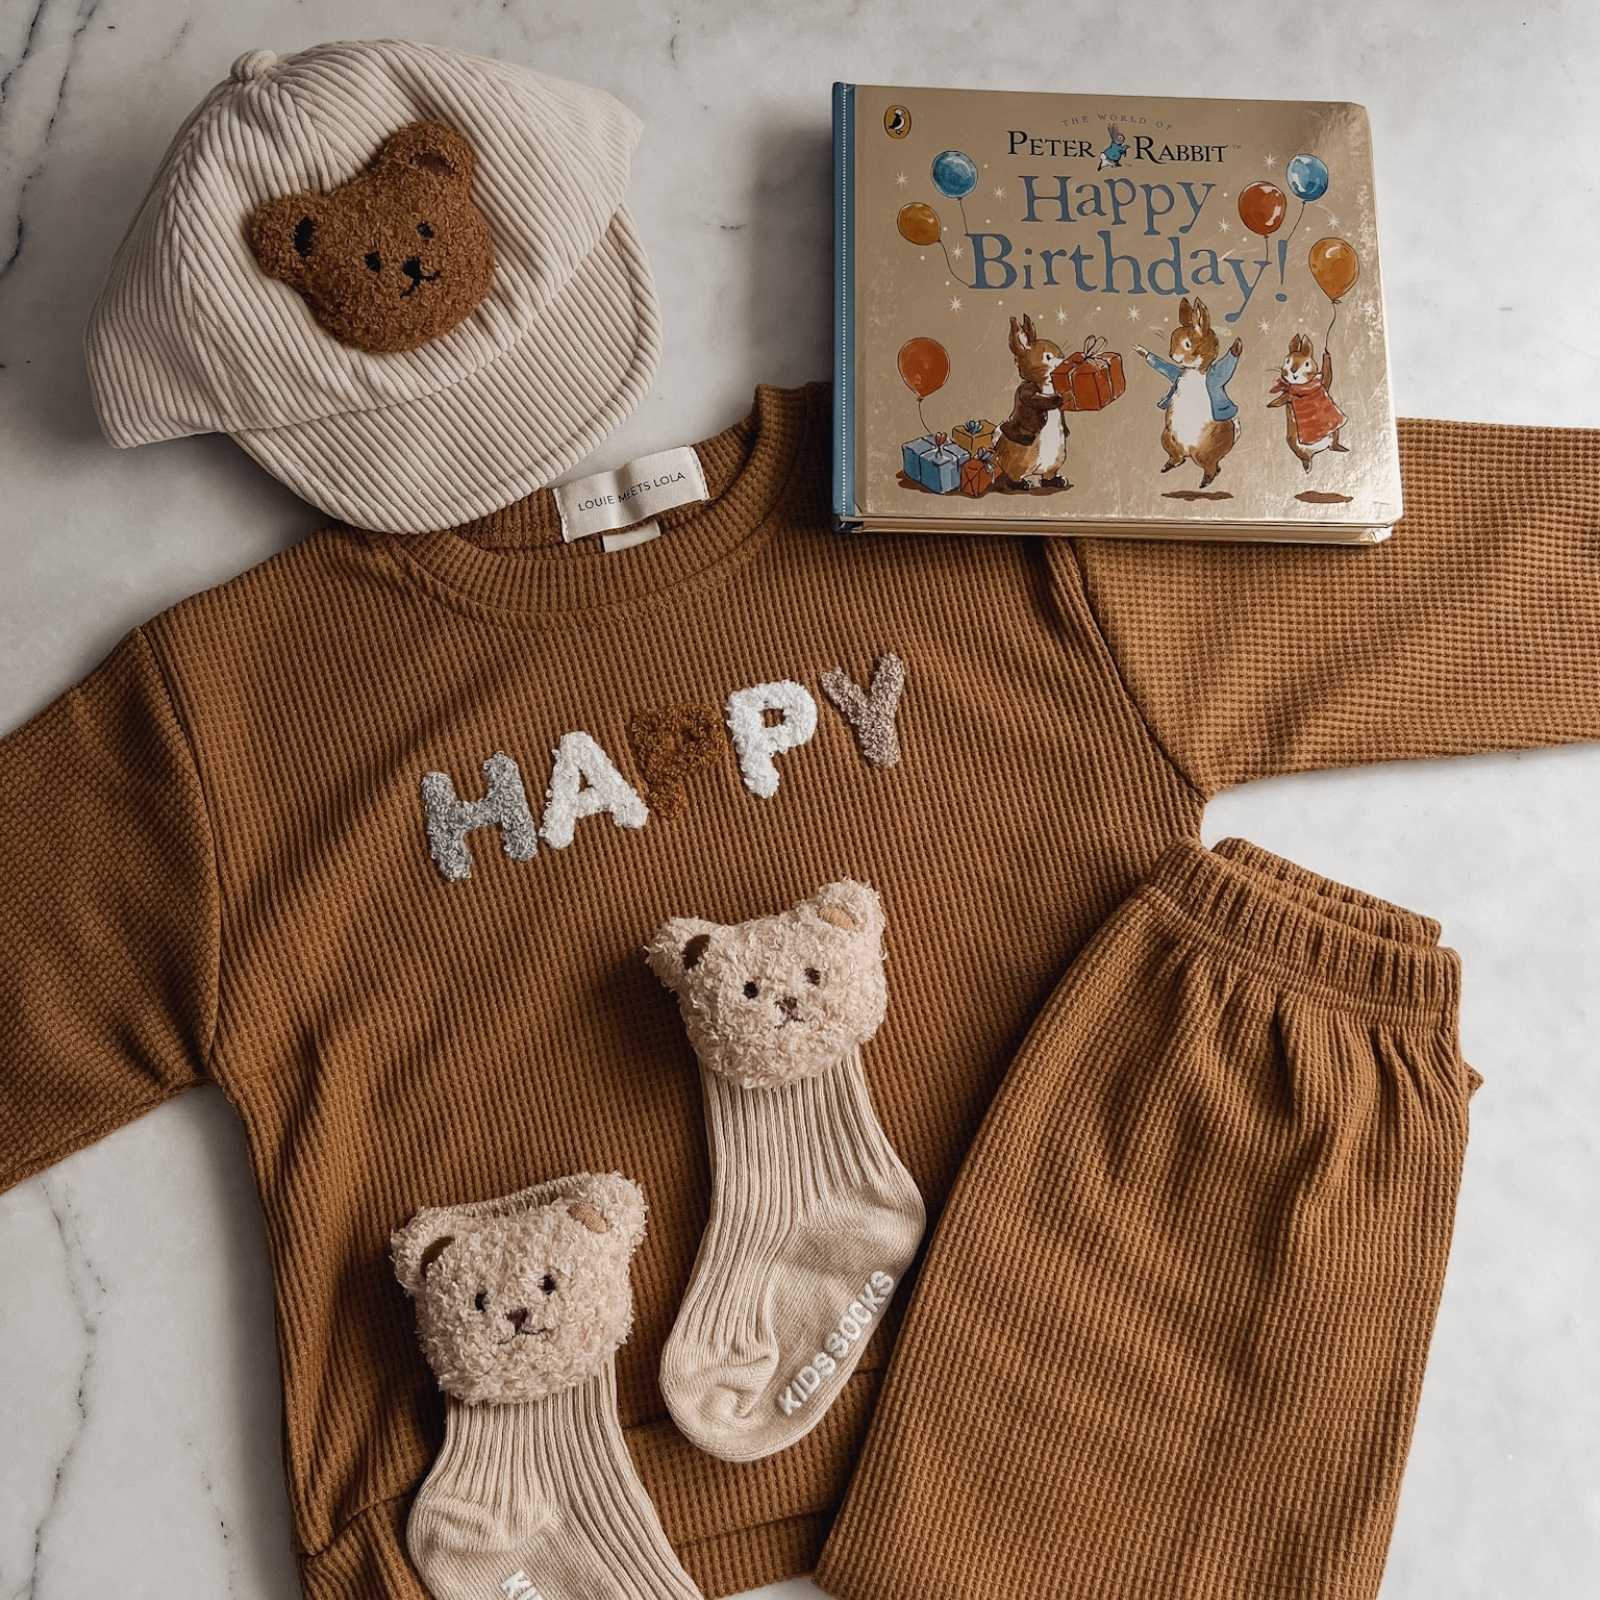 Peter Rabbit Tales - Happy Birthday - Baby Books at Louie Meets Lola